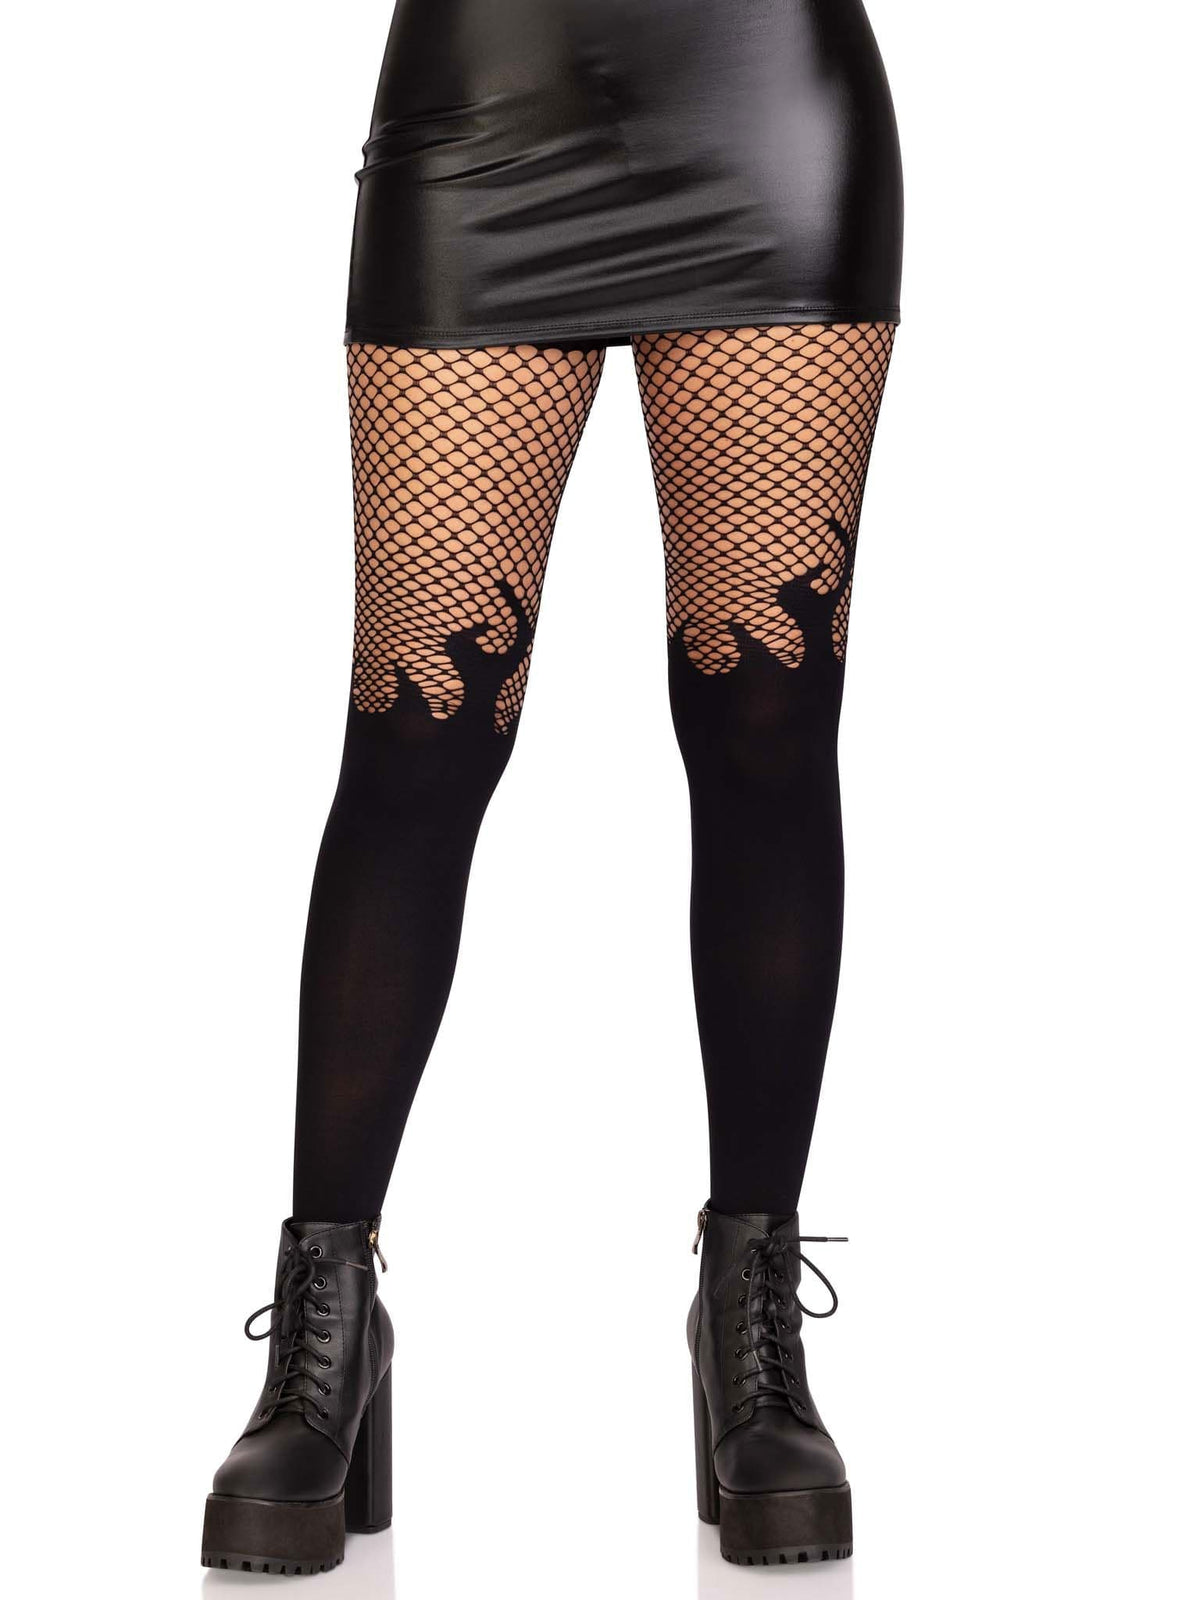 black tights for women, dancing tights for women